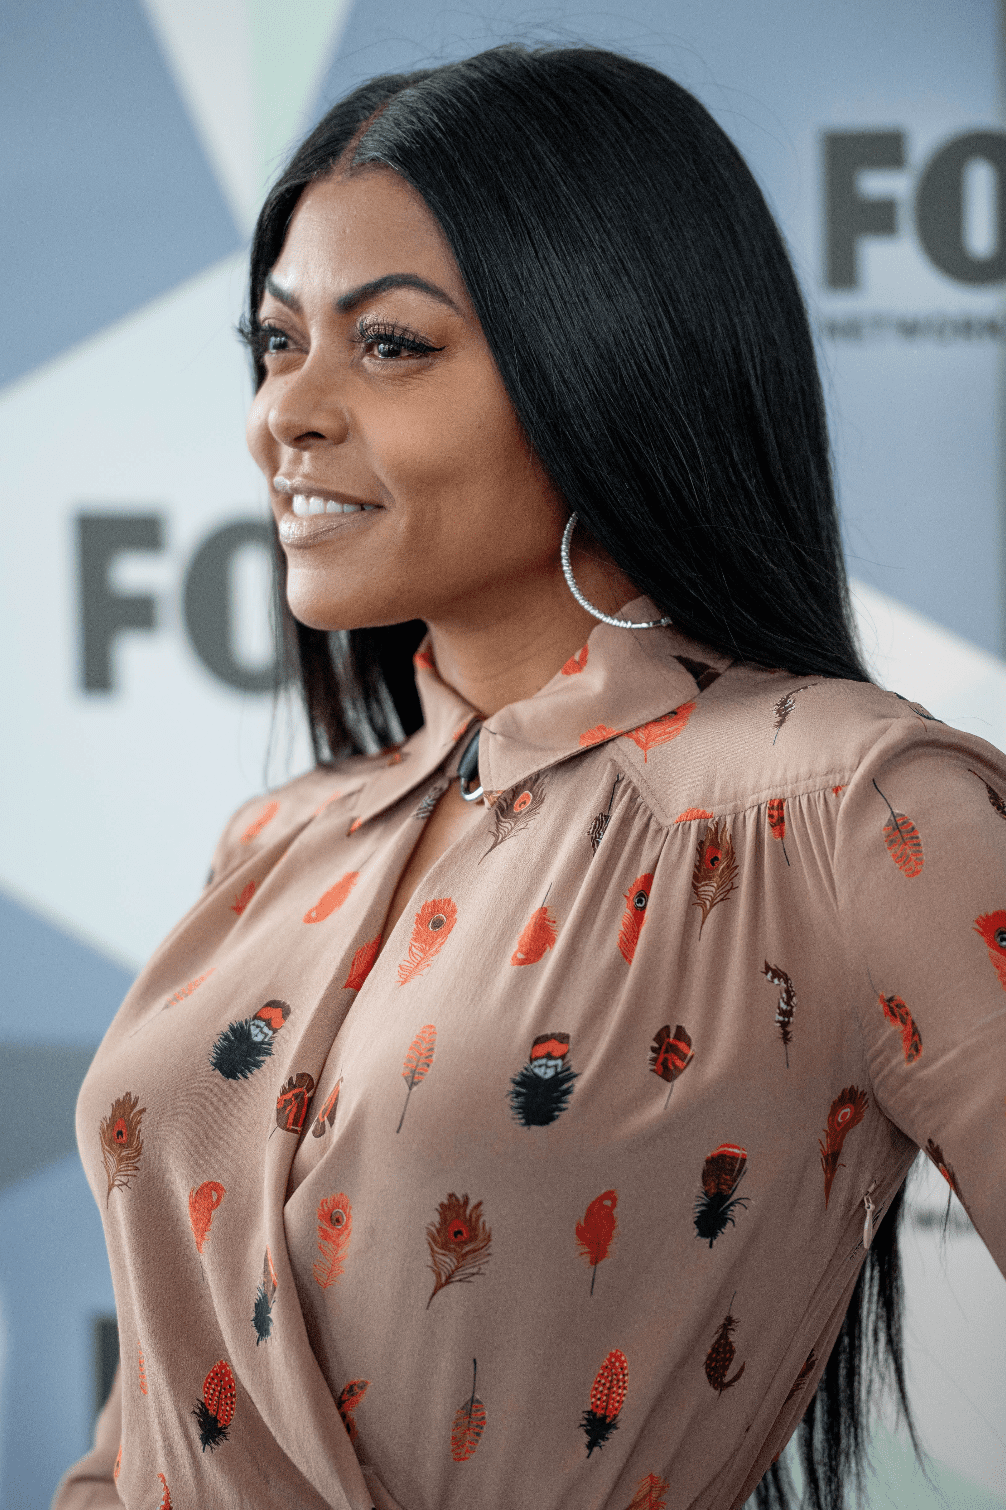 Taraji P. Henson at the 2018 Fox Network Upfront at Wollman Rink, Central Park on May 14, 2018. | Source: Getty Images